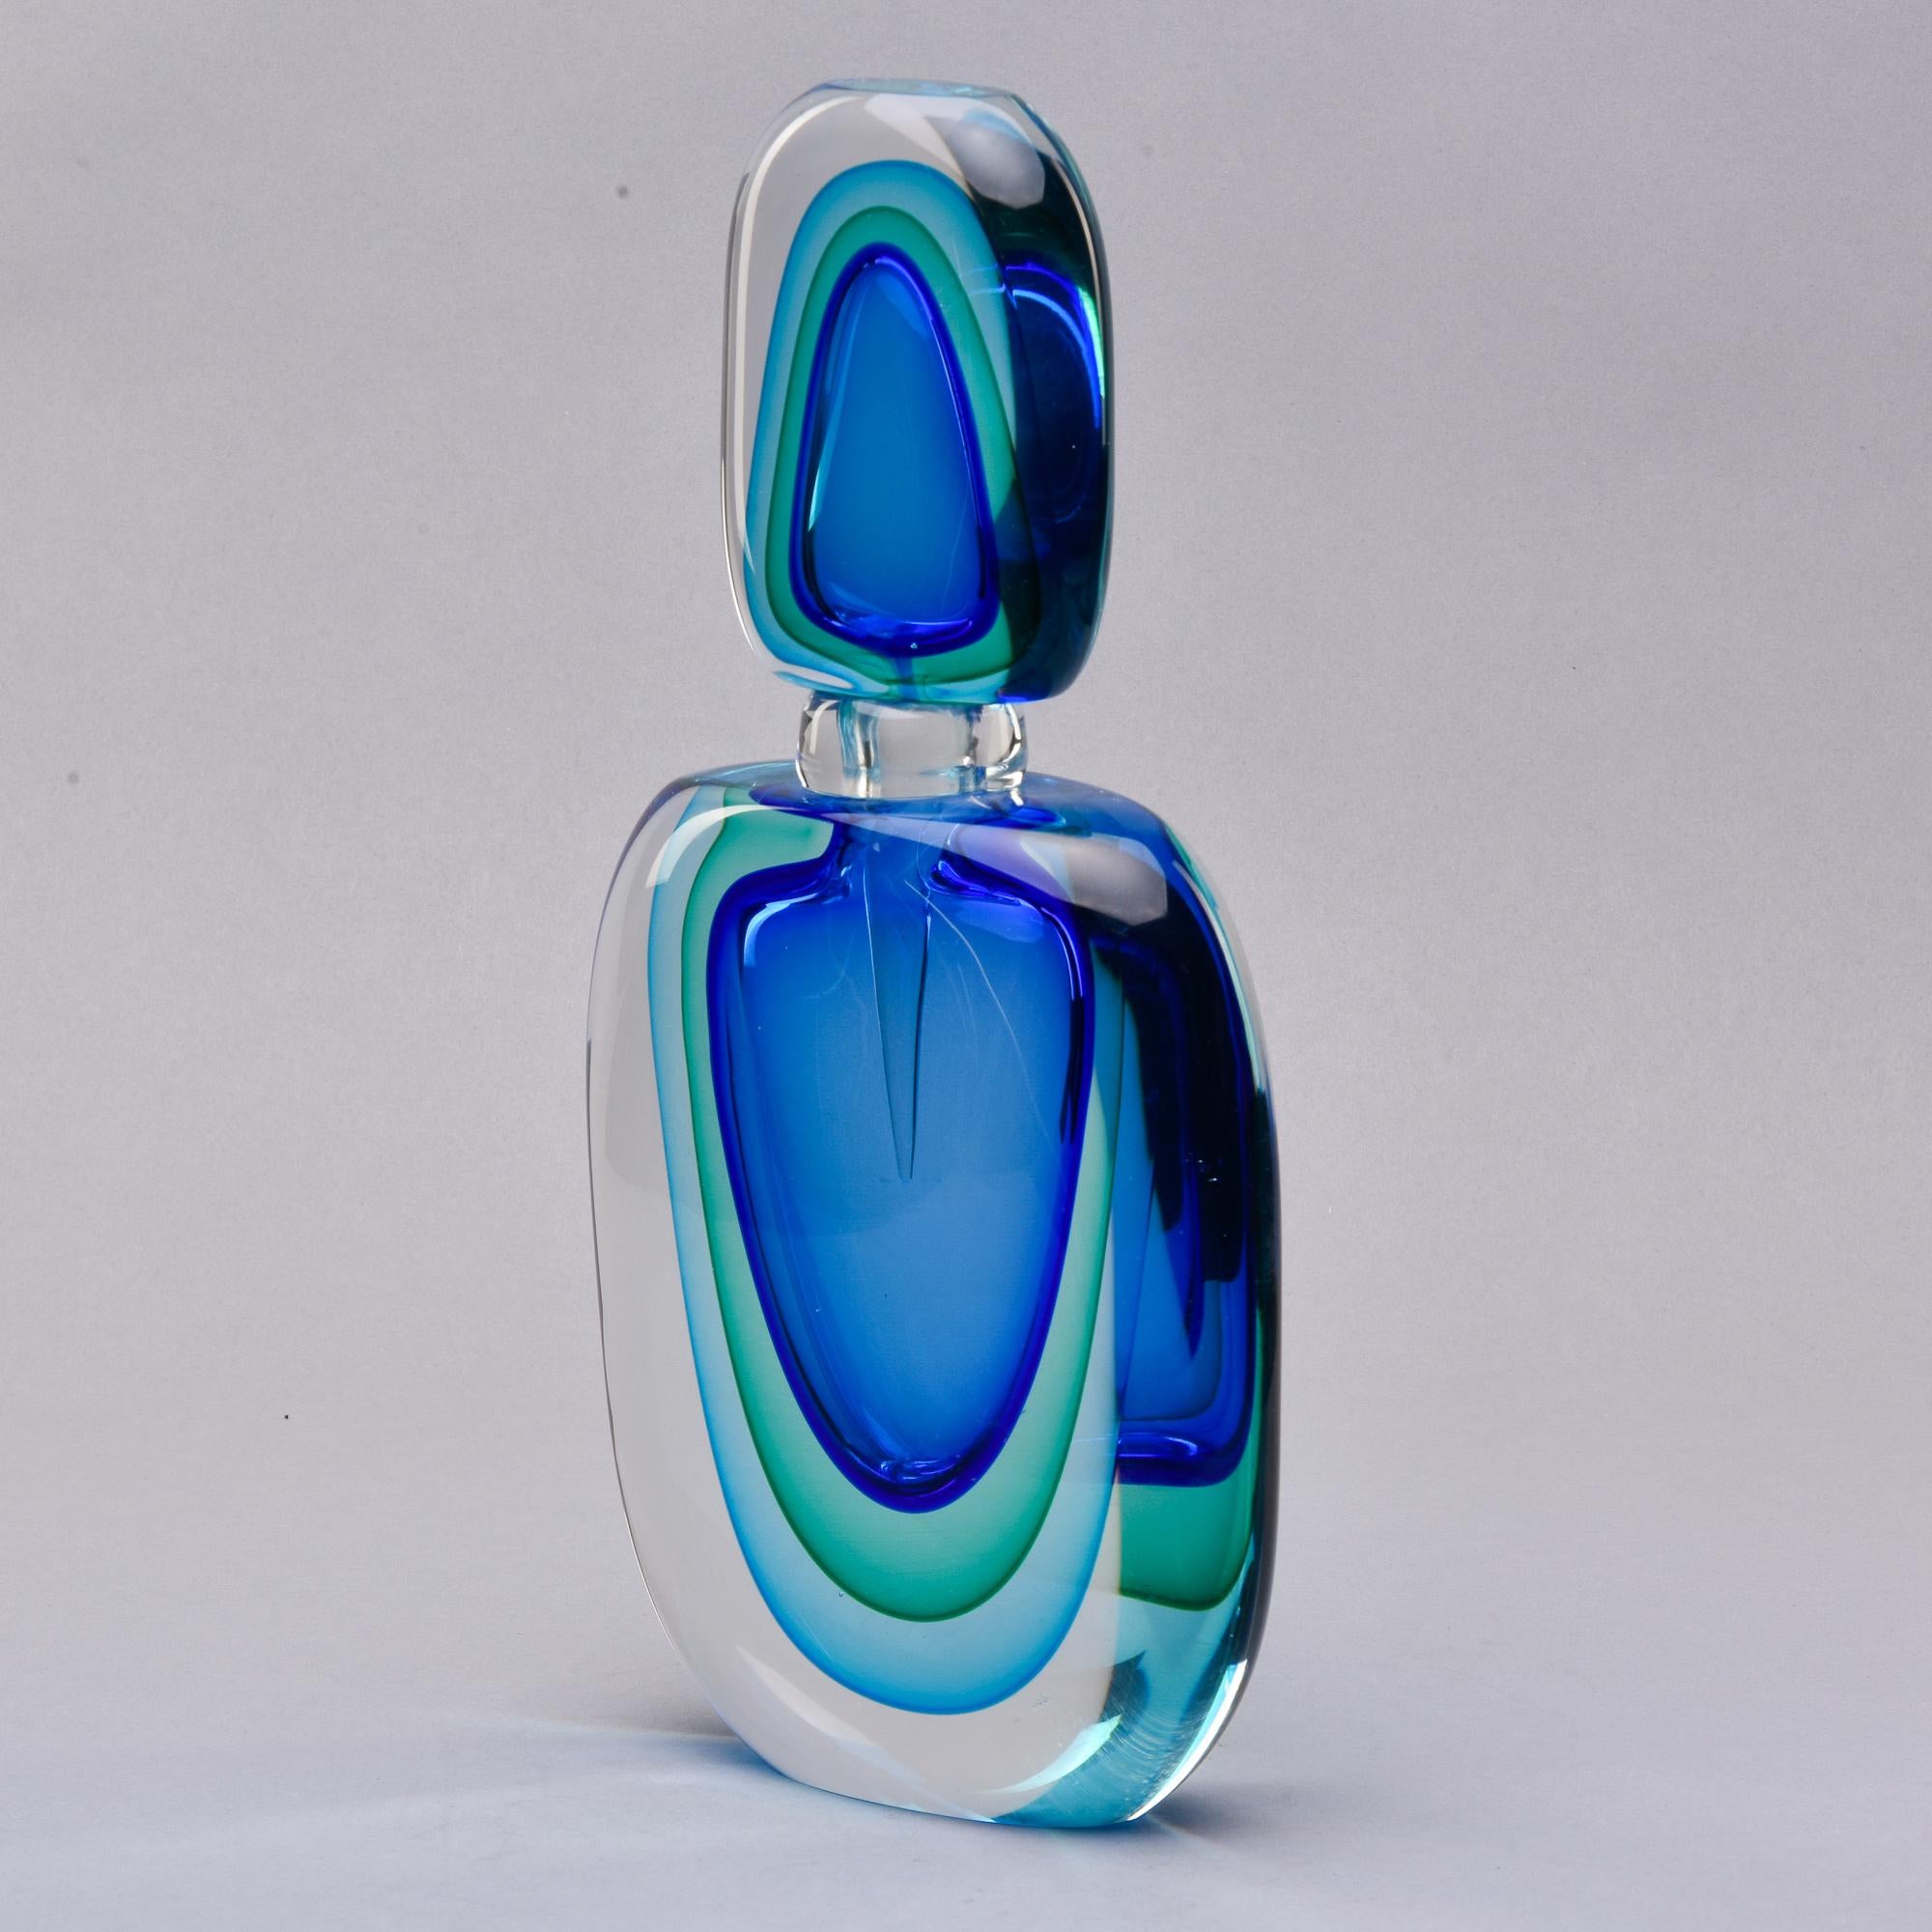 New 14” Tall Murano Glass Sommerso Blue and Green Perfume Bottle 3